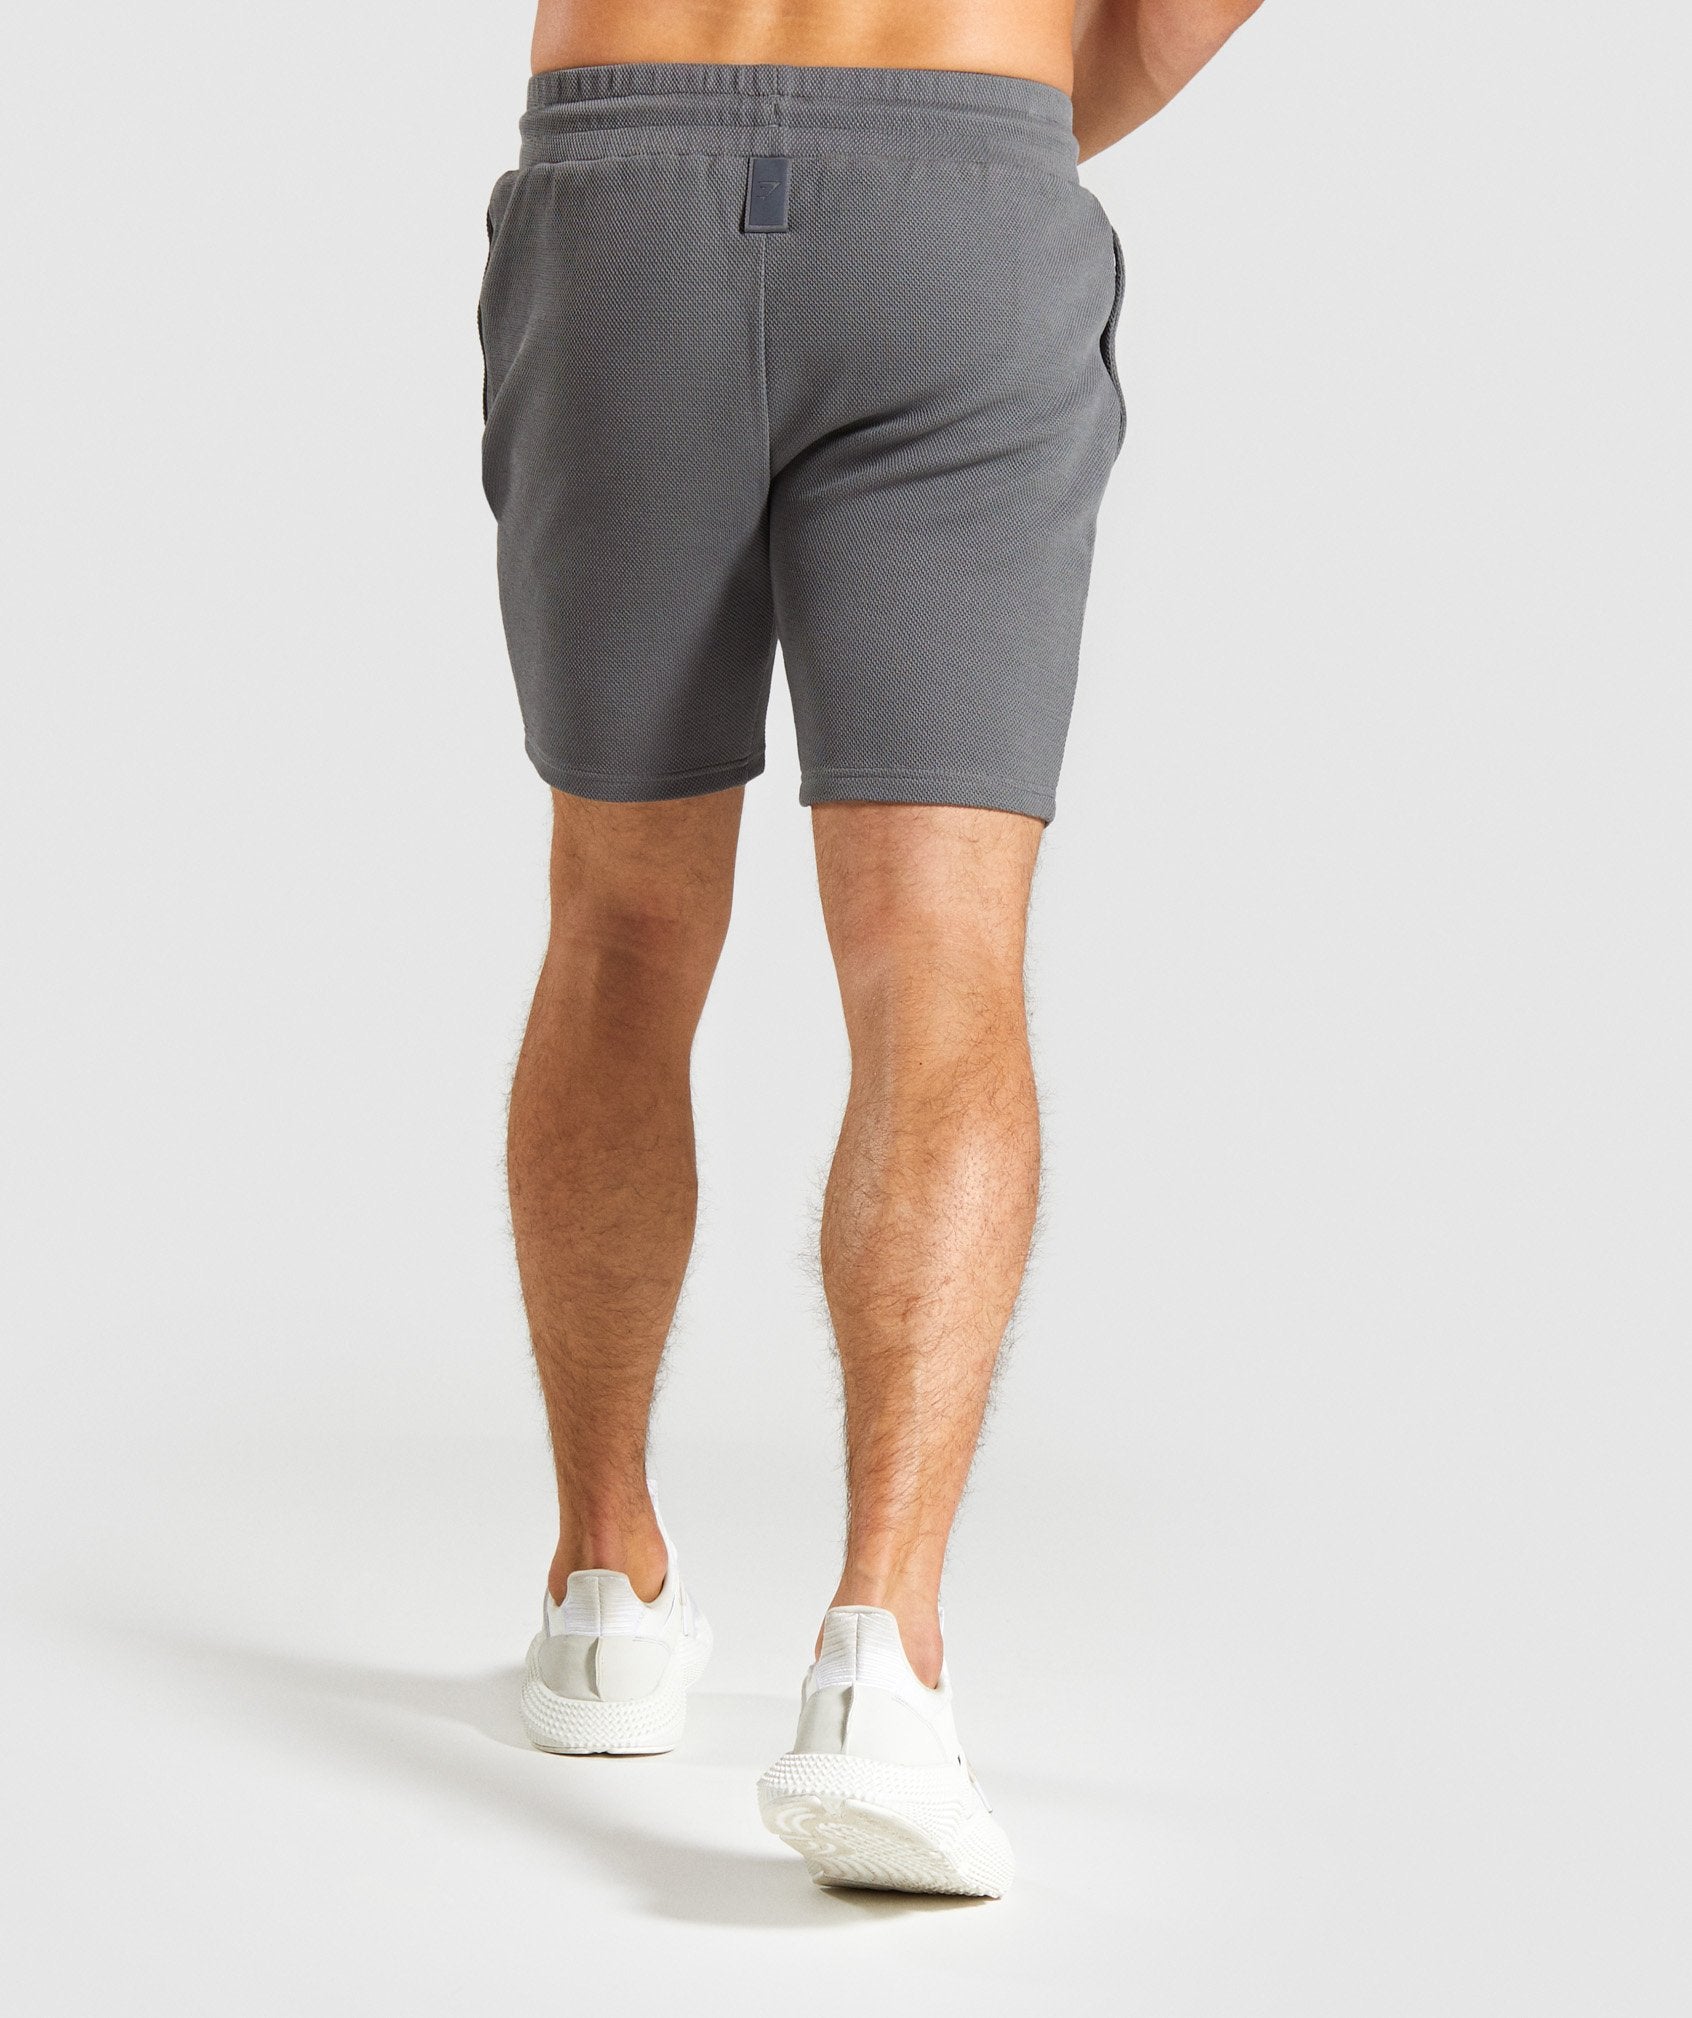 Recharge Shorts in Grey - view 2